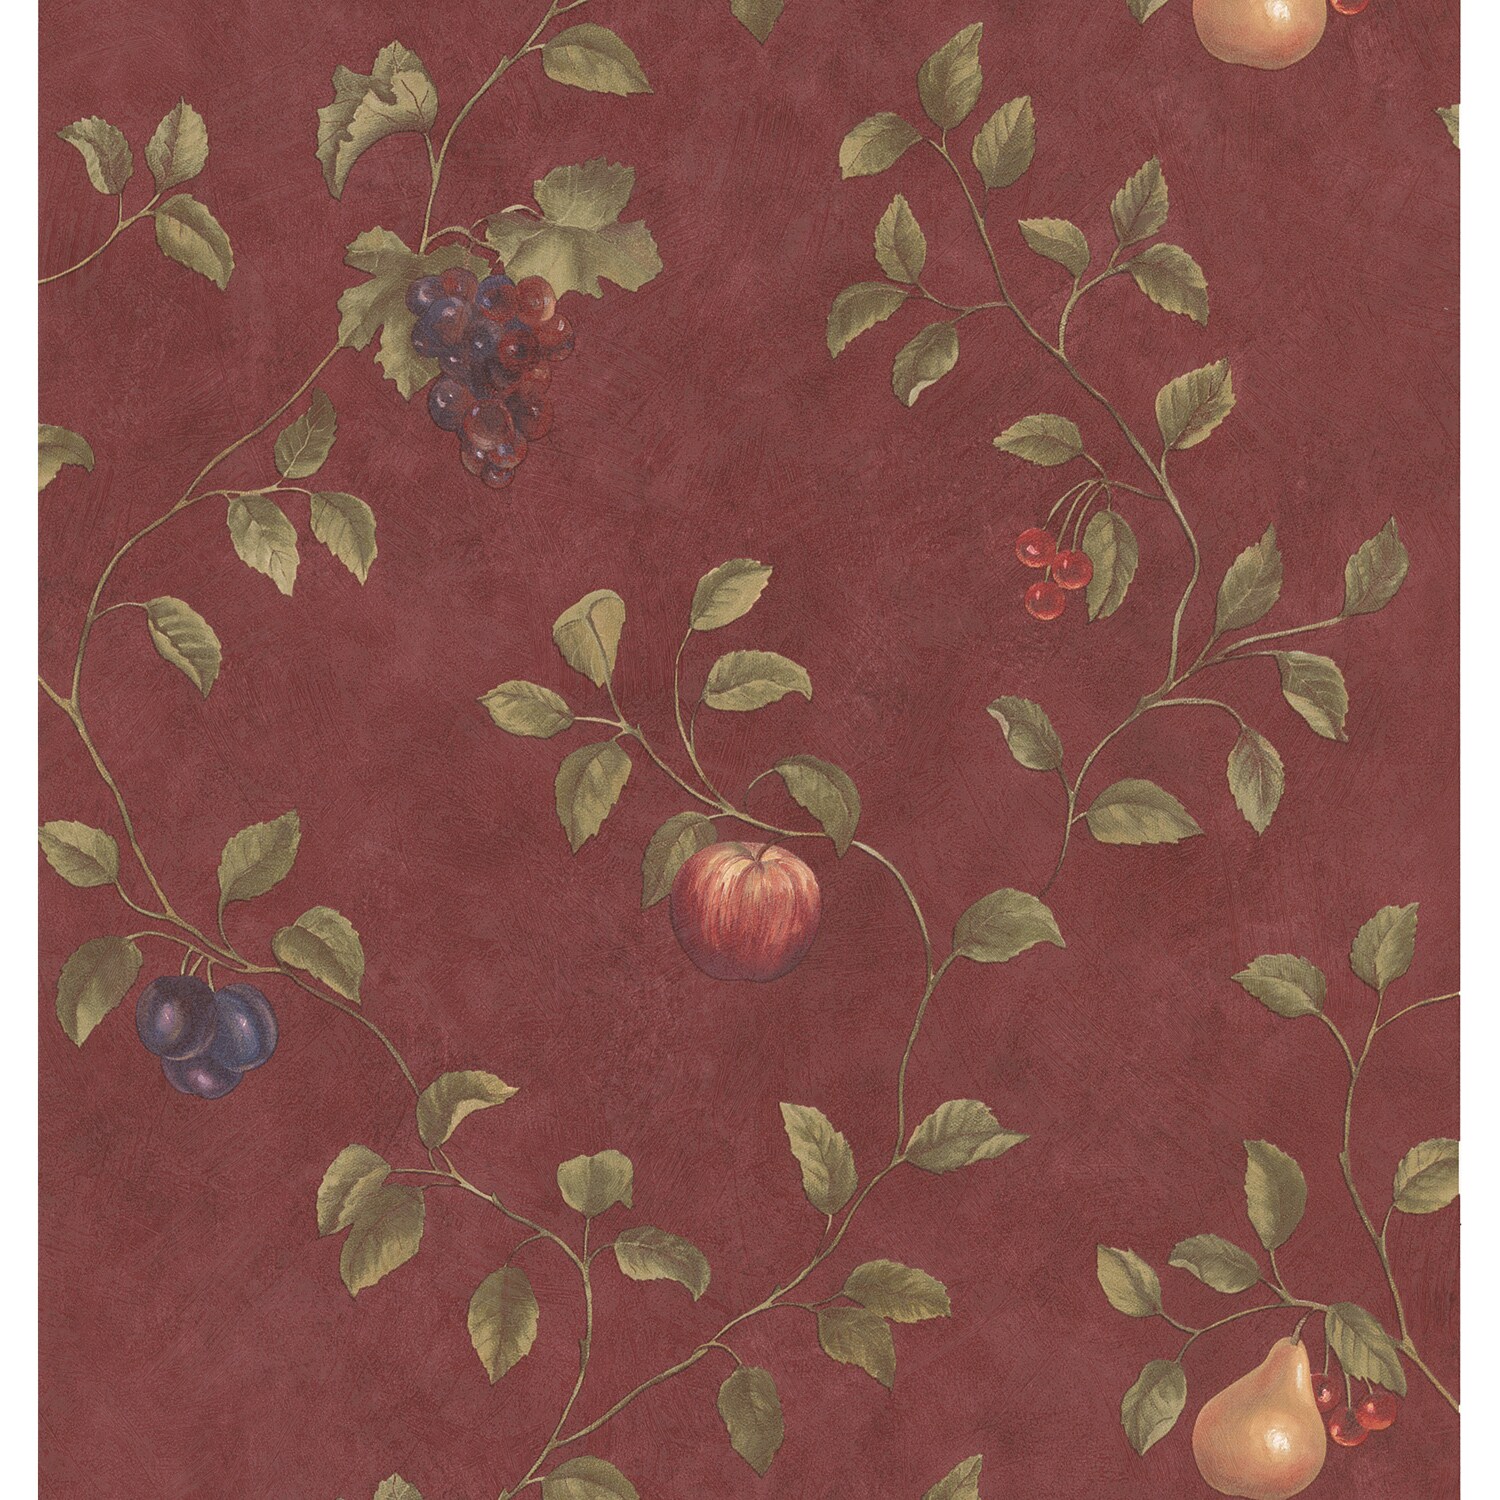 Brewster Red Fruit Trail Wallpaper (RedDimensions 20.5 inches wide x 33 feet longBoy/girl/neutral NeutralTheme TraditionalMaterials Solid sheet vinylCare instructions ScrubbableHanging instructions Pre pastedRepeat 21 inchesMatch Drop )